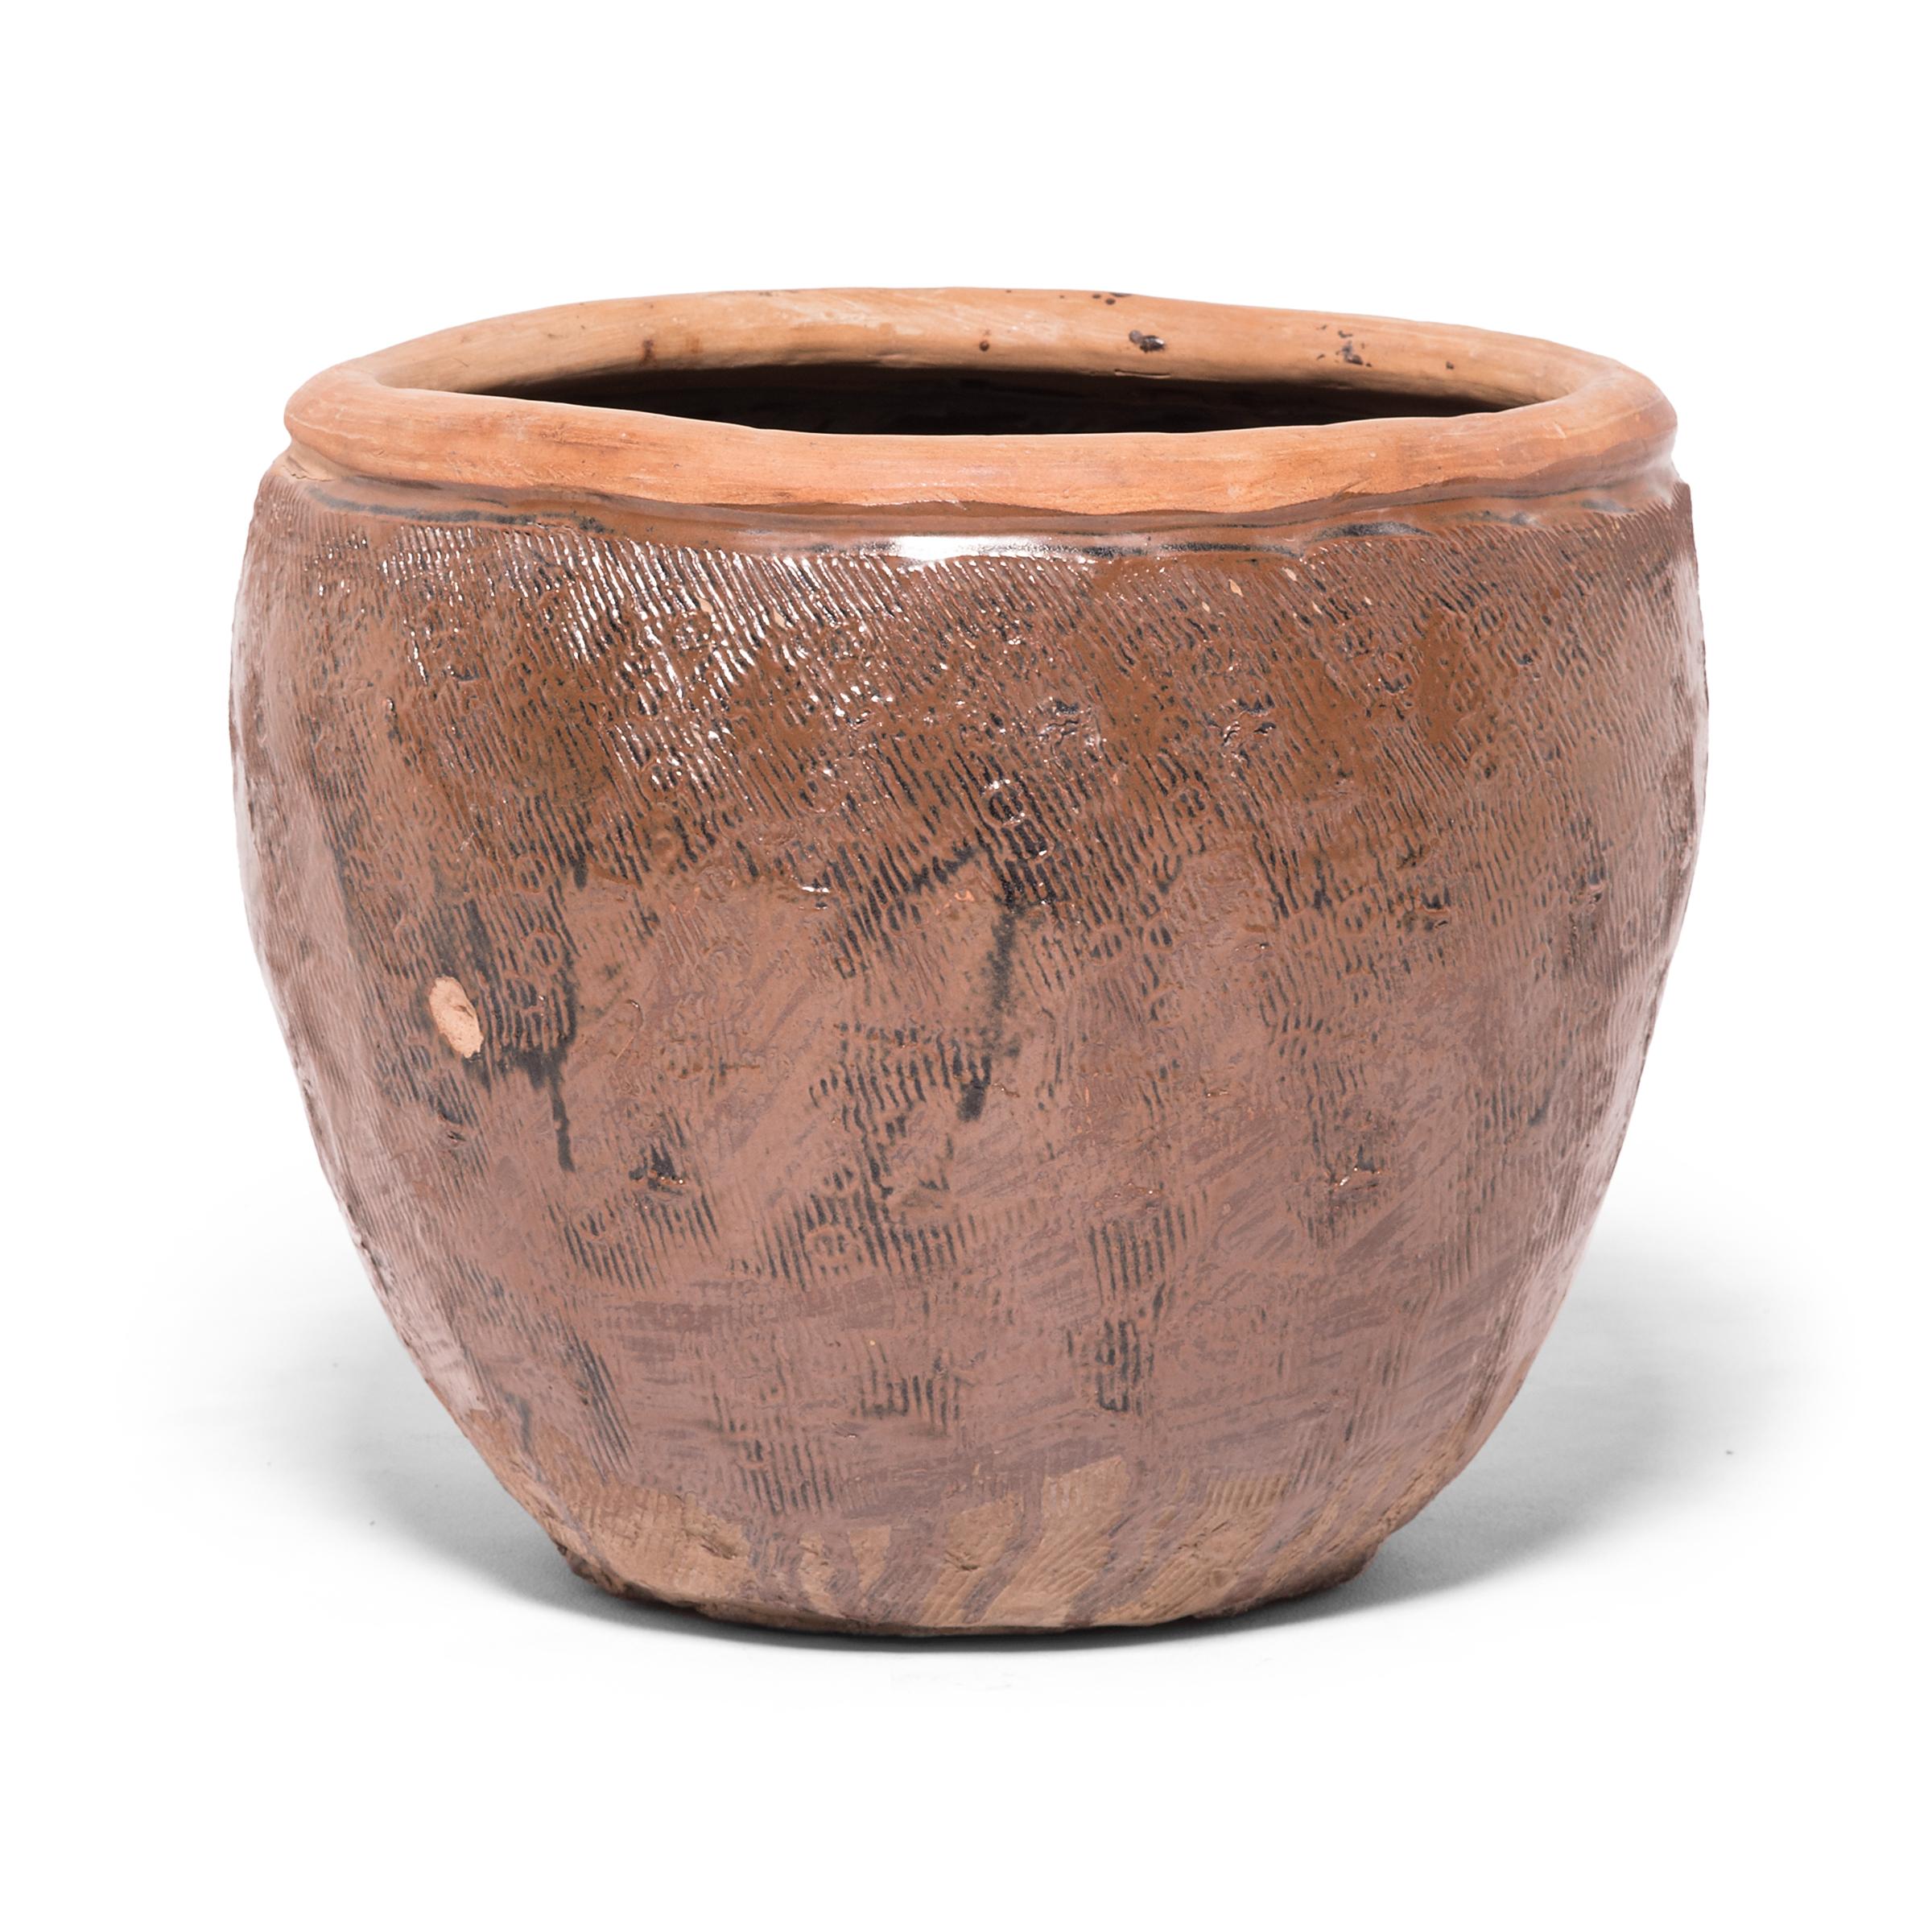 Once used to hold stockpiles of grain, this capacious terracotta jar is distinguished by the energetic incised pattern covering its exterior. Using a simple forked tool, the potter layered the vessel with dense etchings to enliven the simply shaped